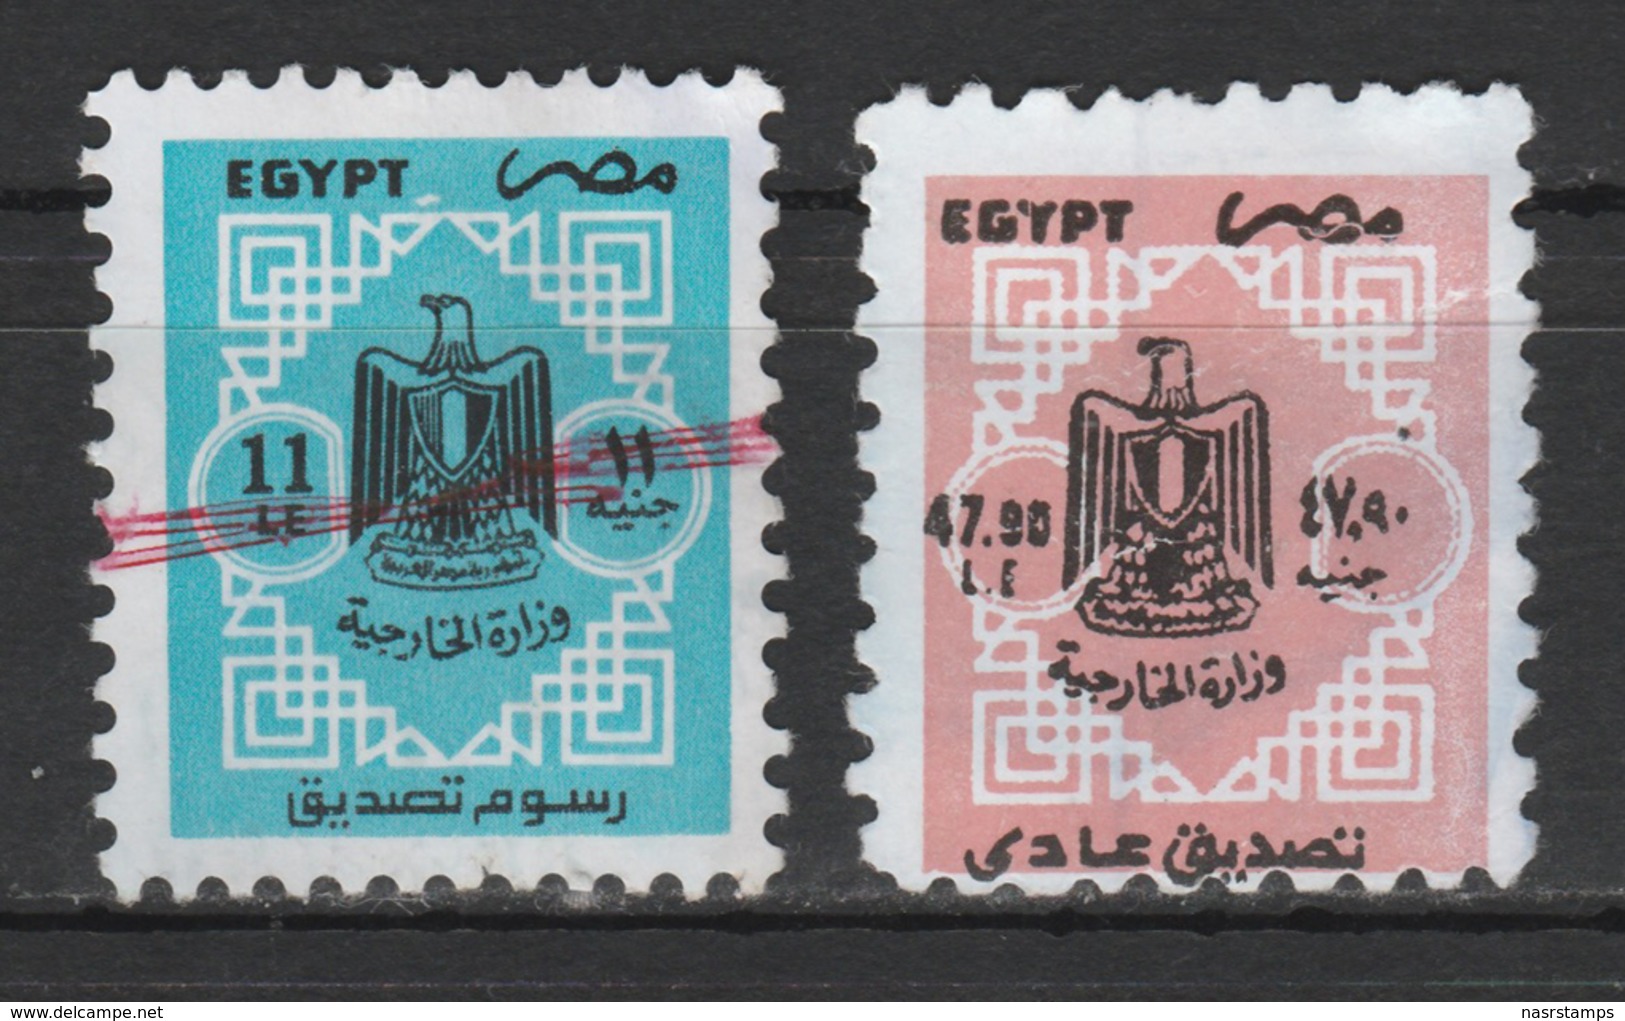 Egypt - Rare - ( Old Revenue - Ministry Of Foreign Affairs - 11 & 47.90 EGP ) Used - Used Stamps